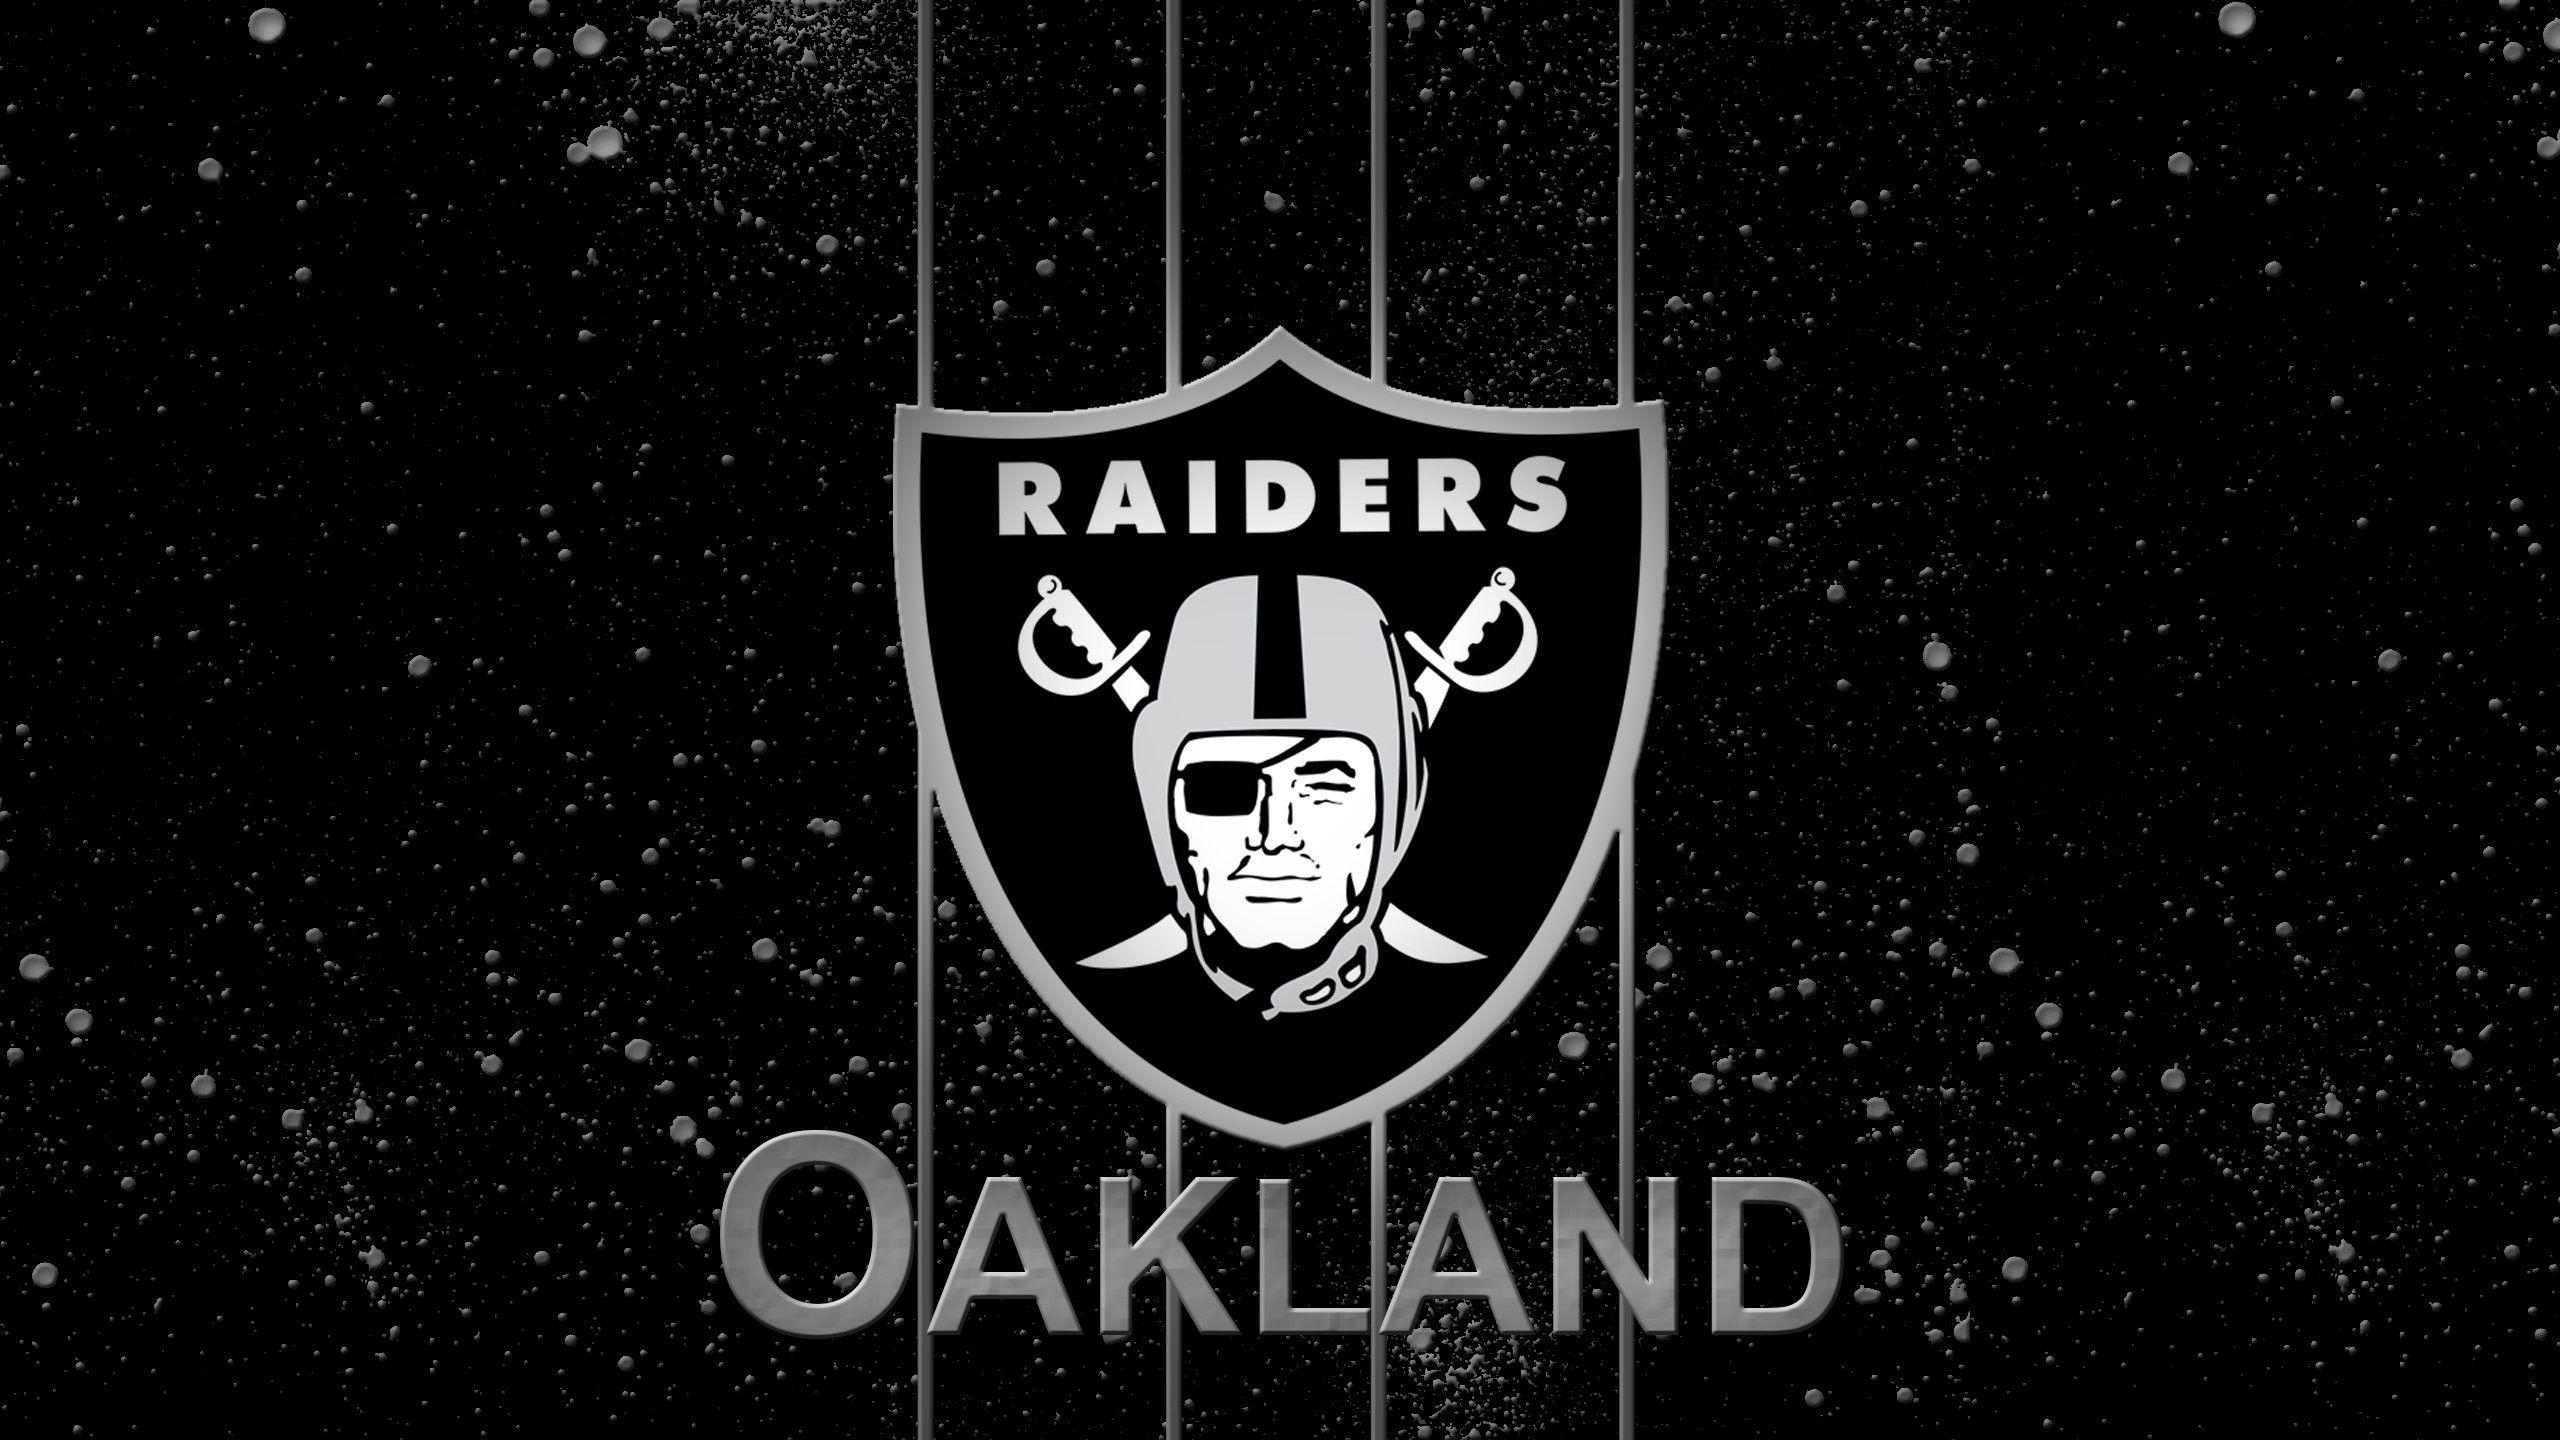 Oakland Raiders Wallpapers - Top Free